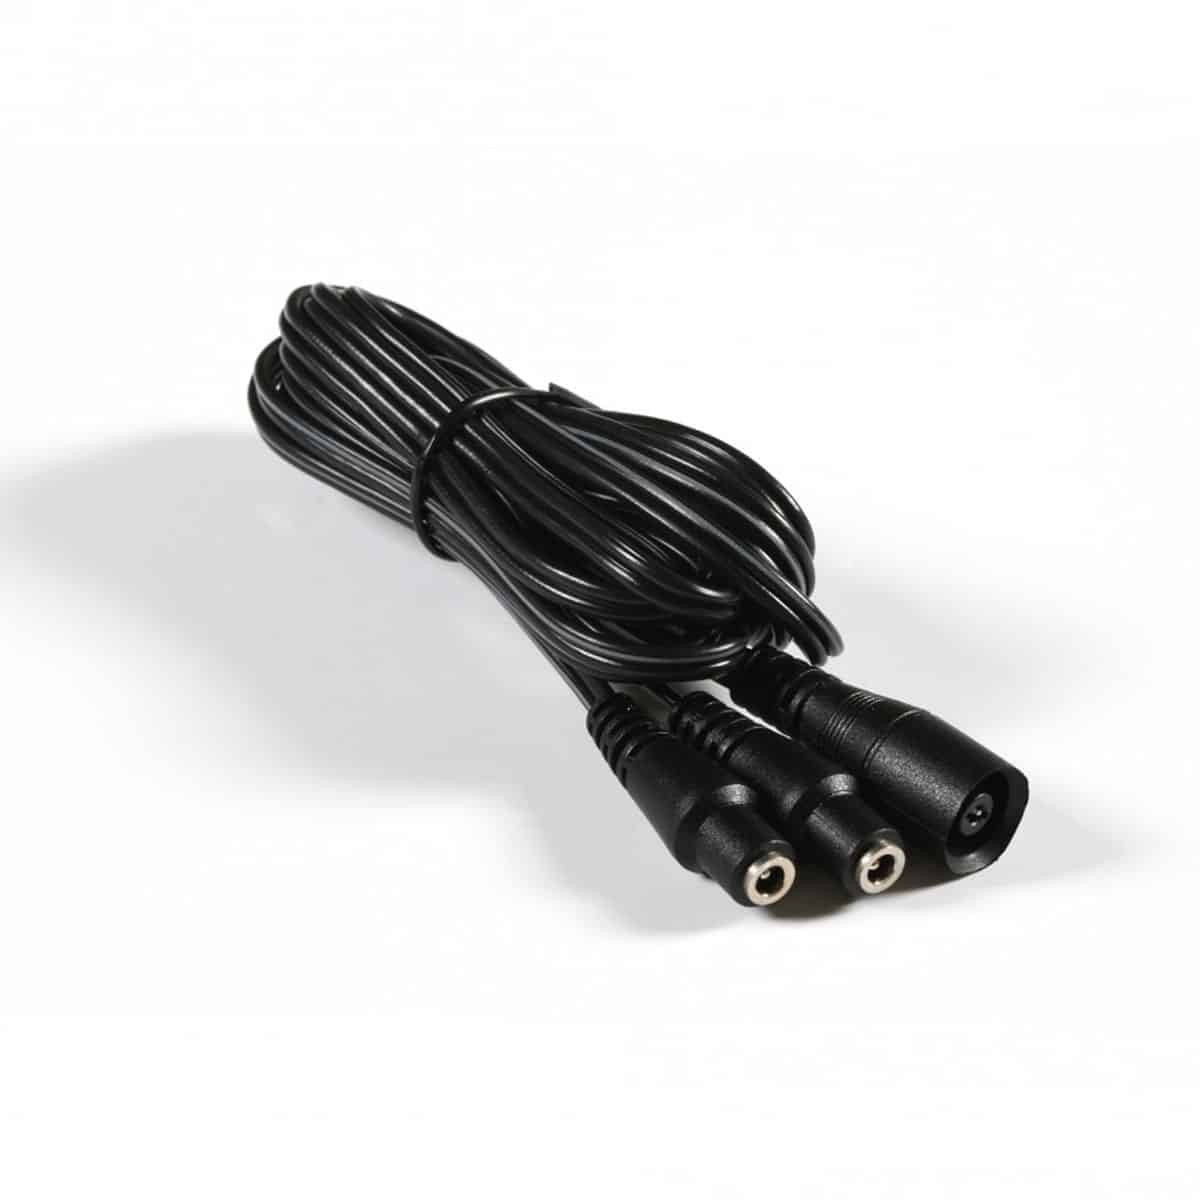 12V extension cable to power Macna heated gloves from the 12V vehicle battery outlet